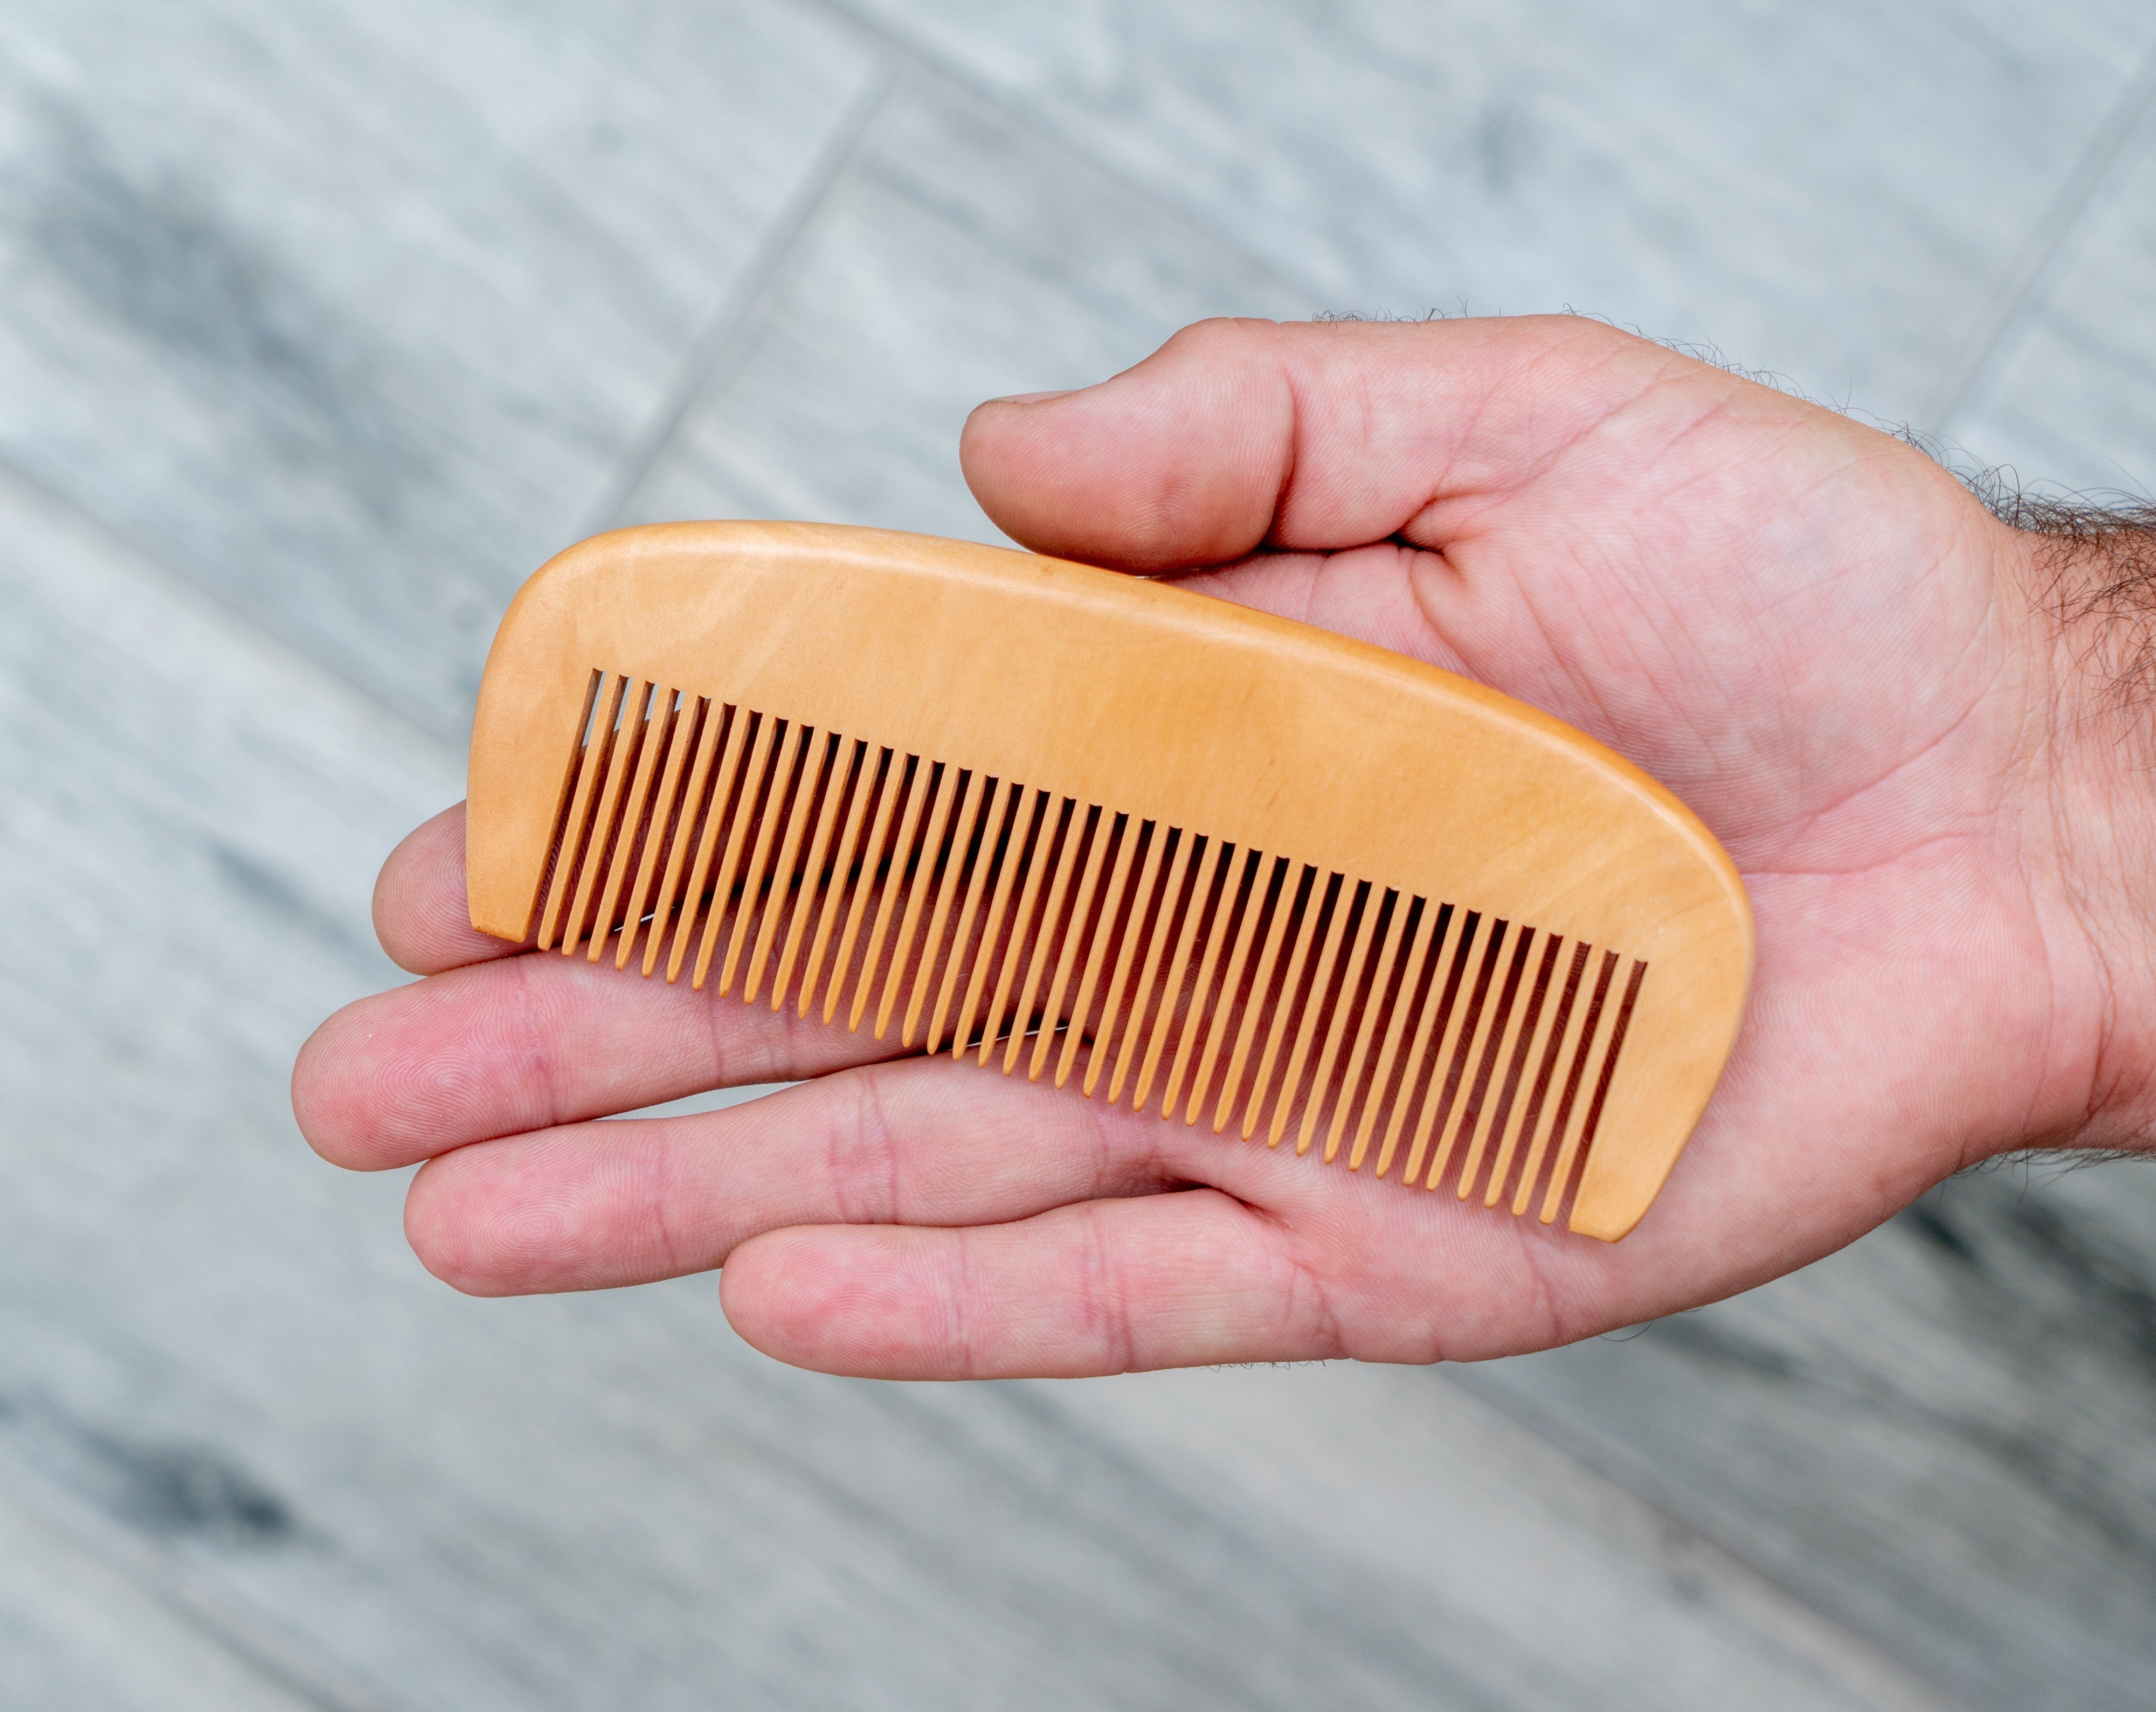 12ct One-Sided Wooden Combs for Travel